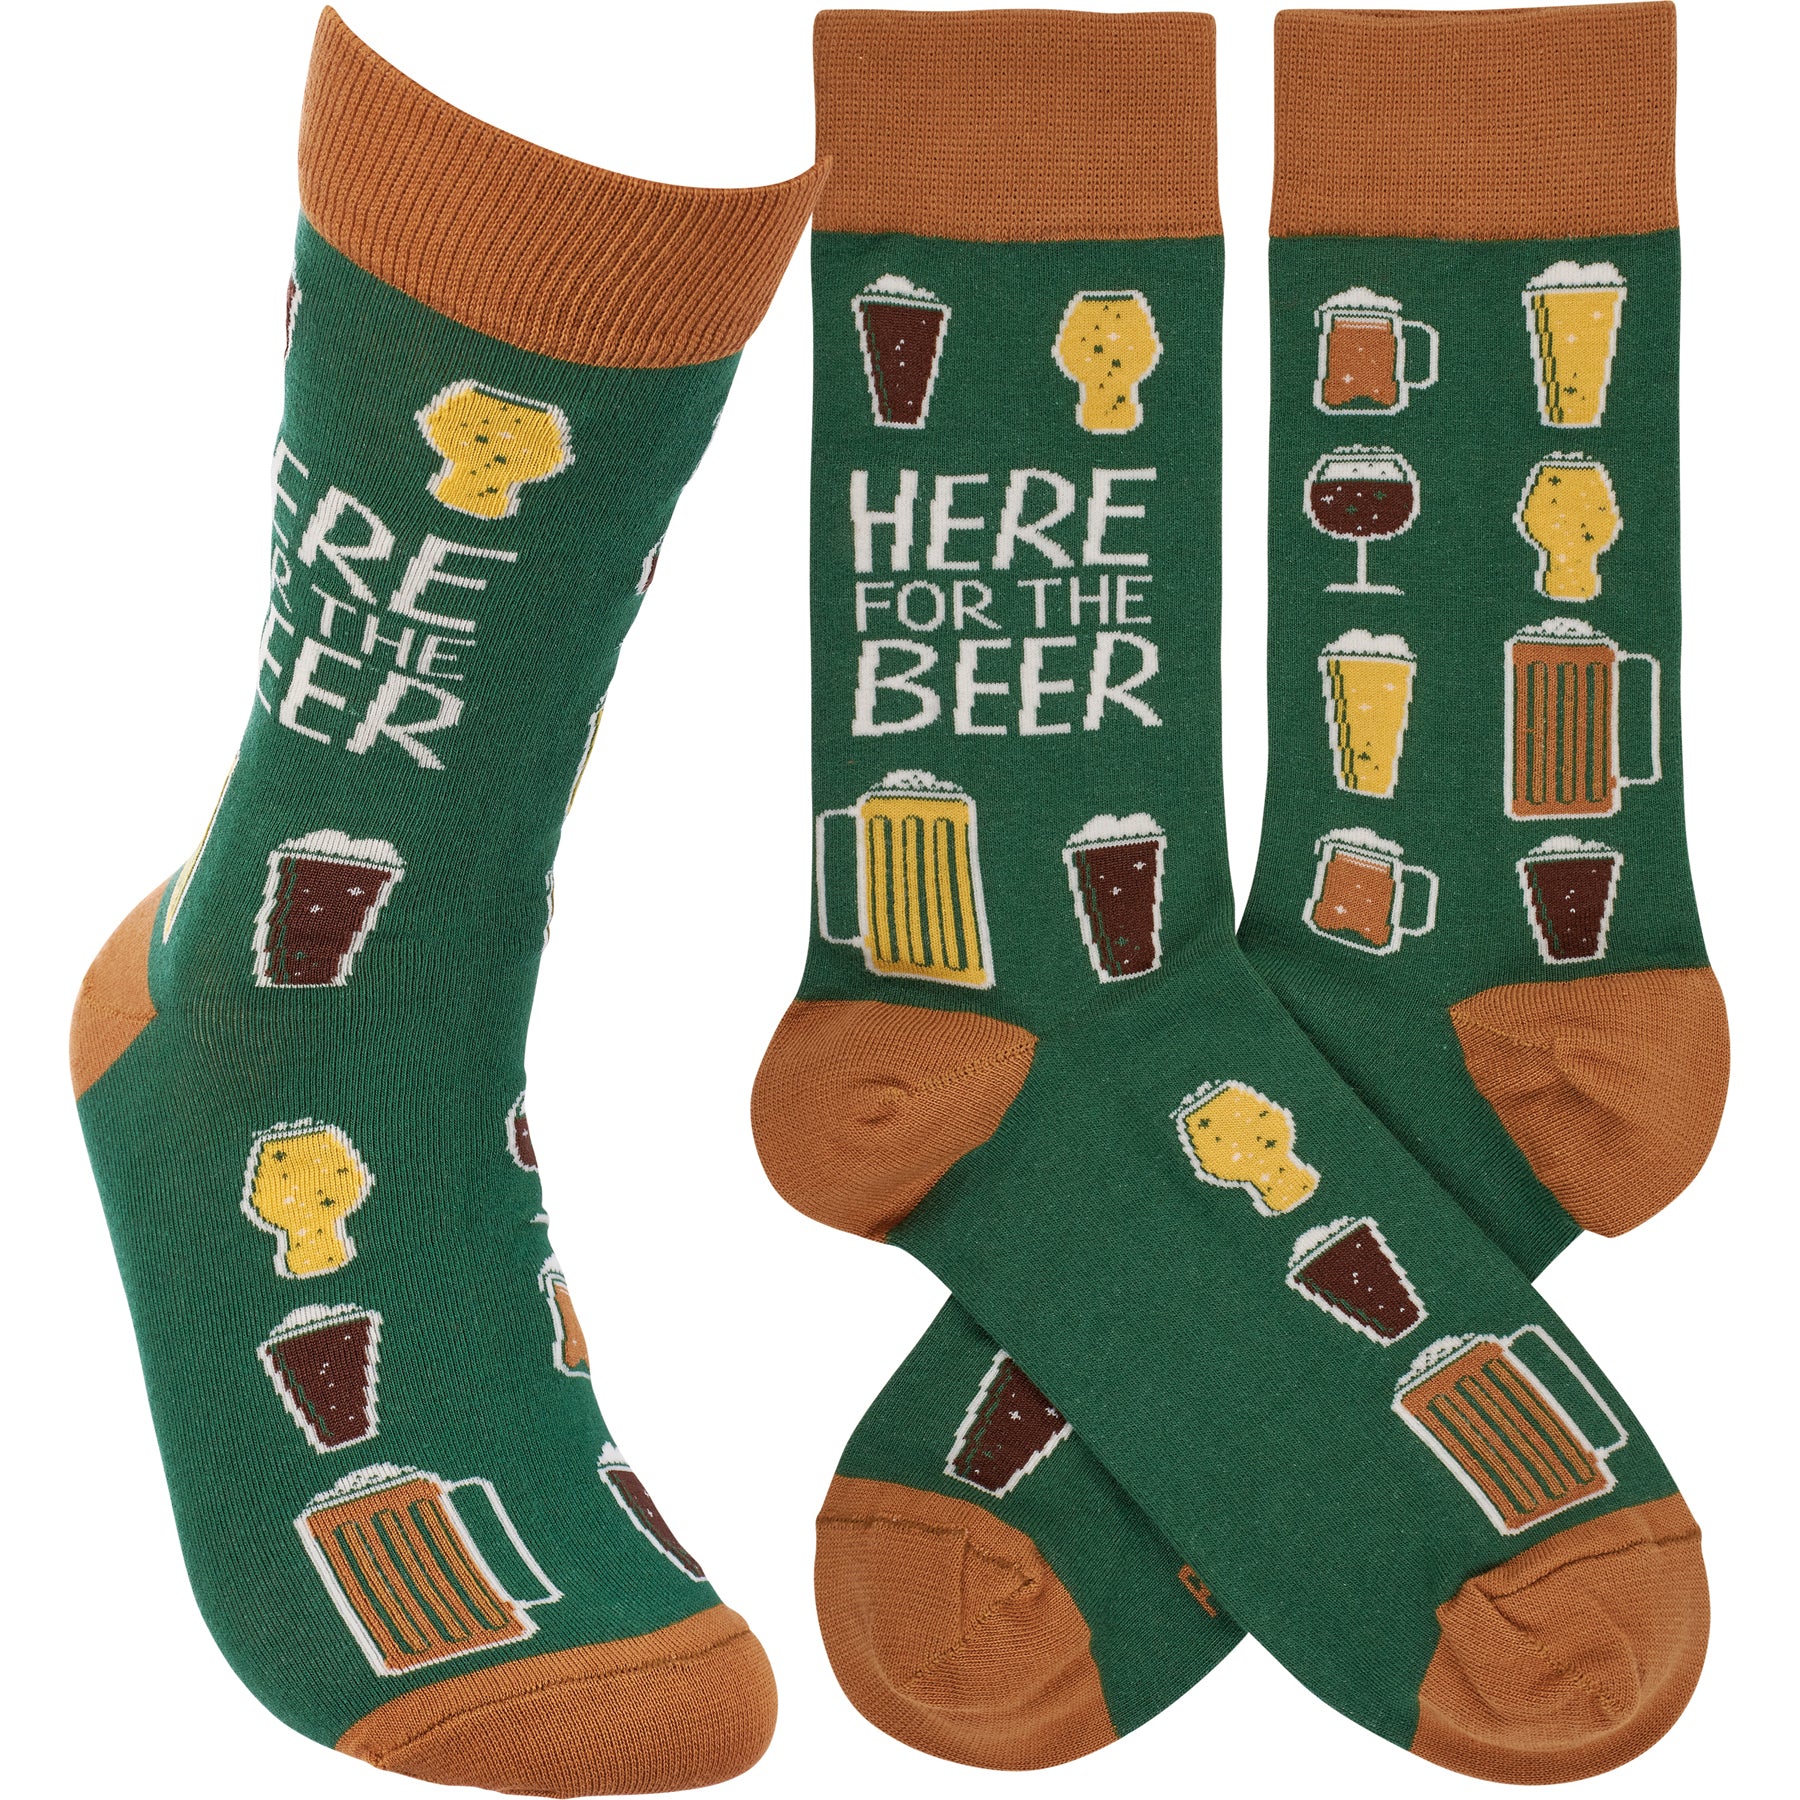 Socks - Here For The Beer